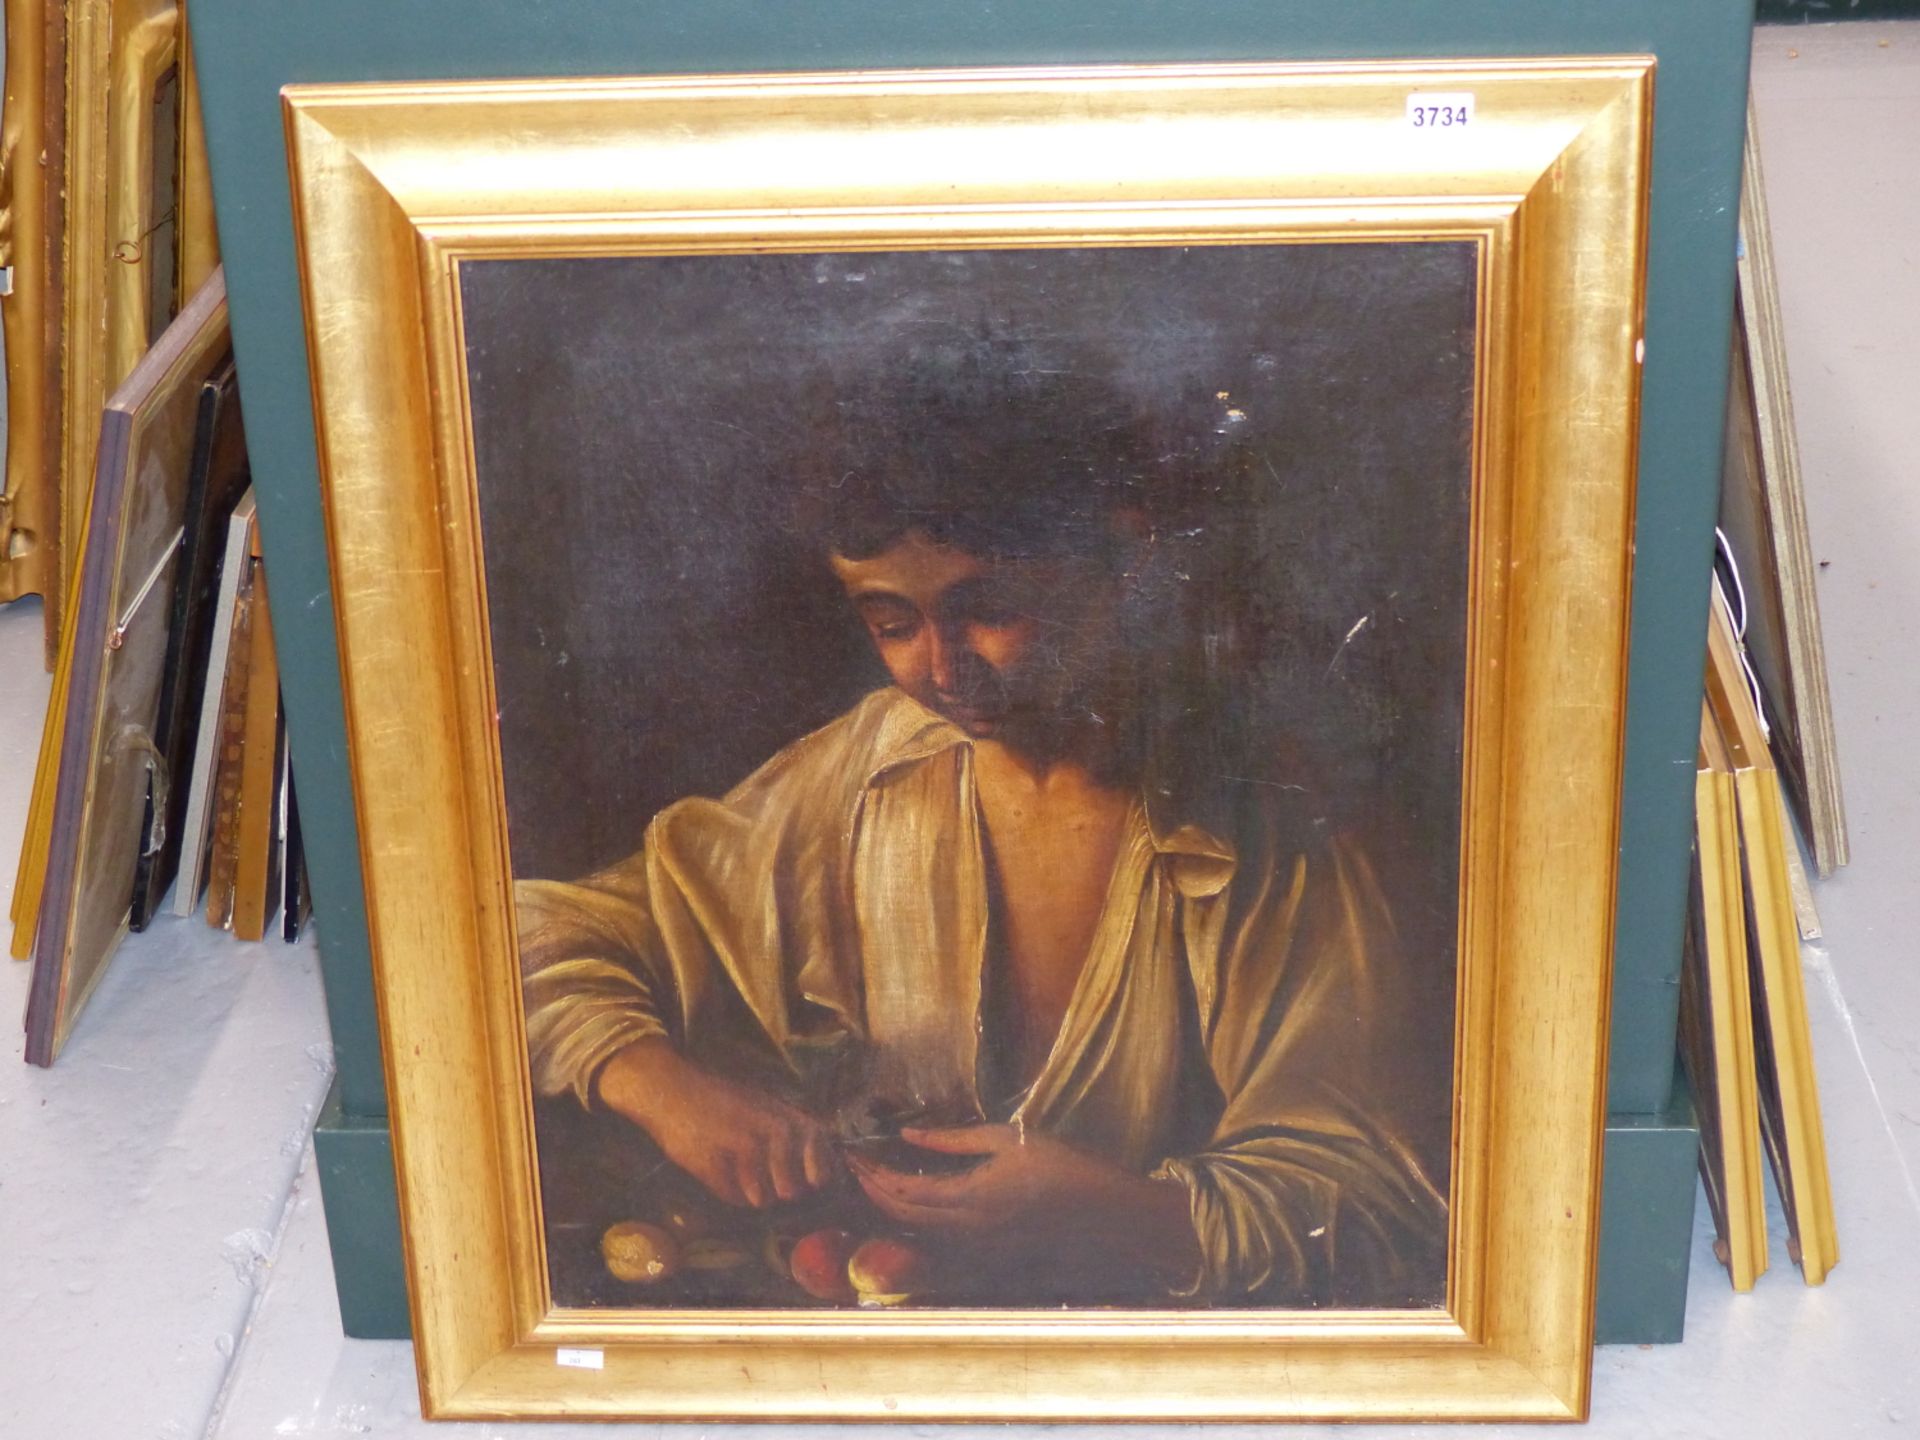 AFTER THE OLD MASTERS. (EARLY 19TH CENTURY) A YOUNG MAN PEELING APPLES. OIL ON CANVAS 50 X 60 cm. - Image 5 of 6